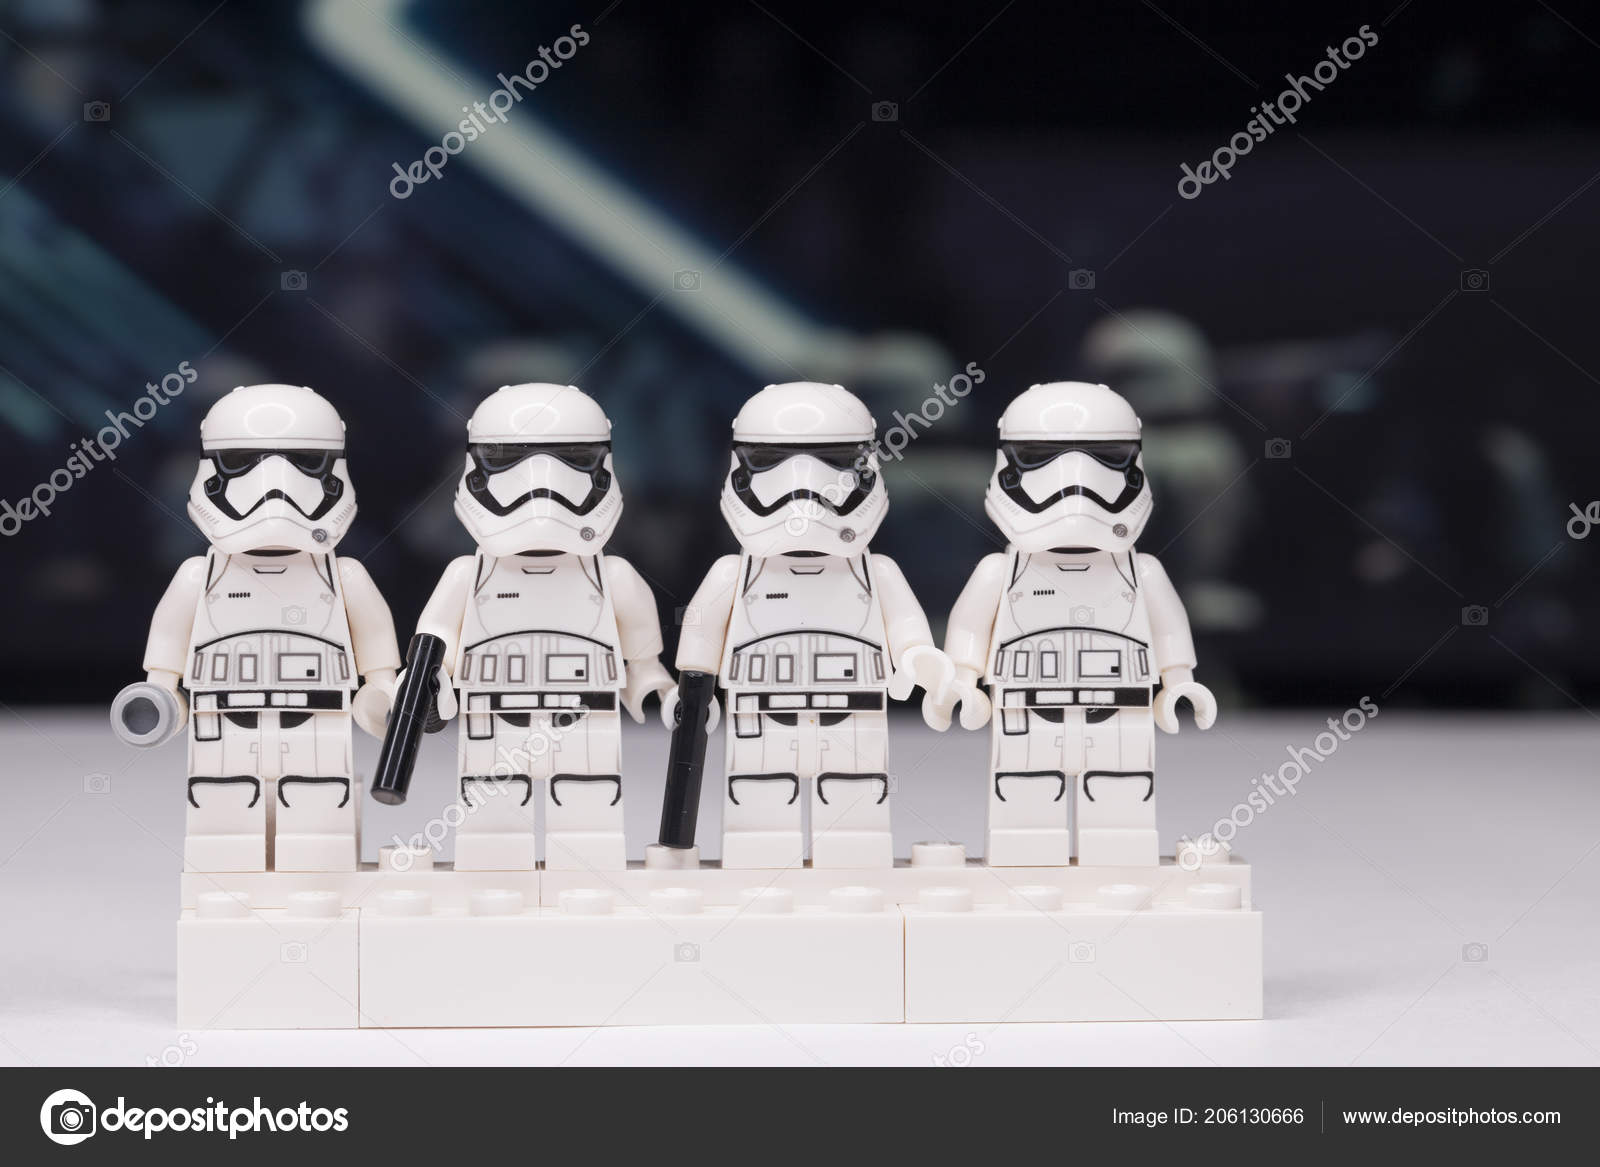 Russia 2018 Constructor Lego Star Wars Mini Figures Soldiers – Stock Editorial Photo ©